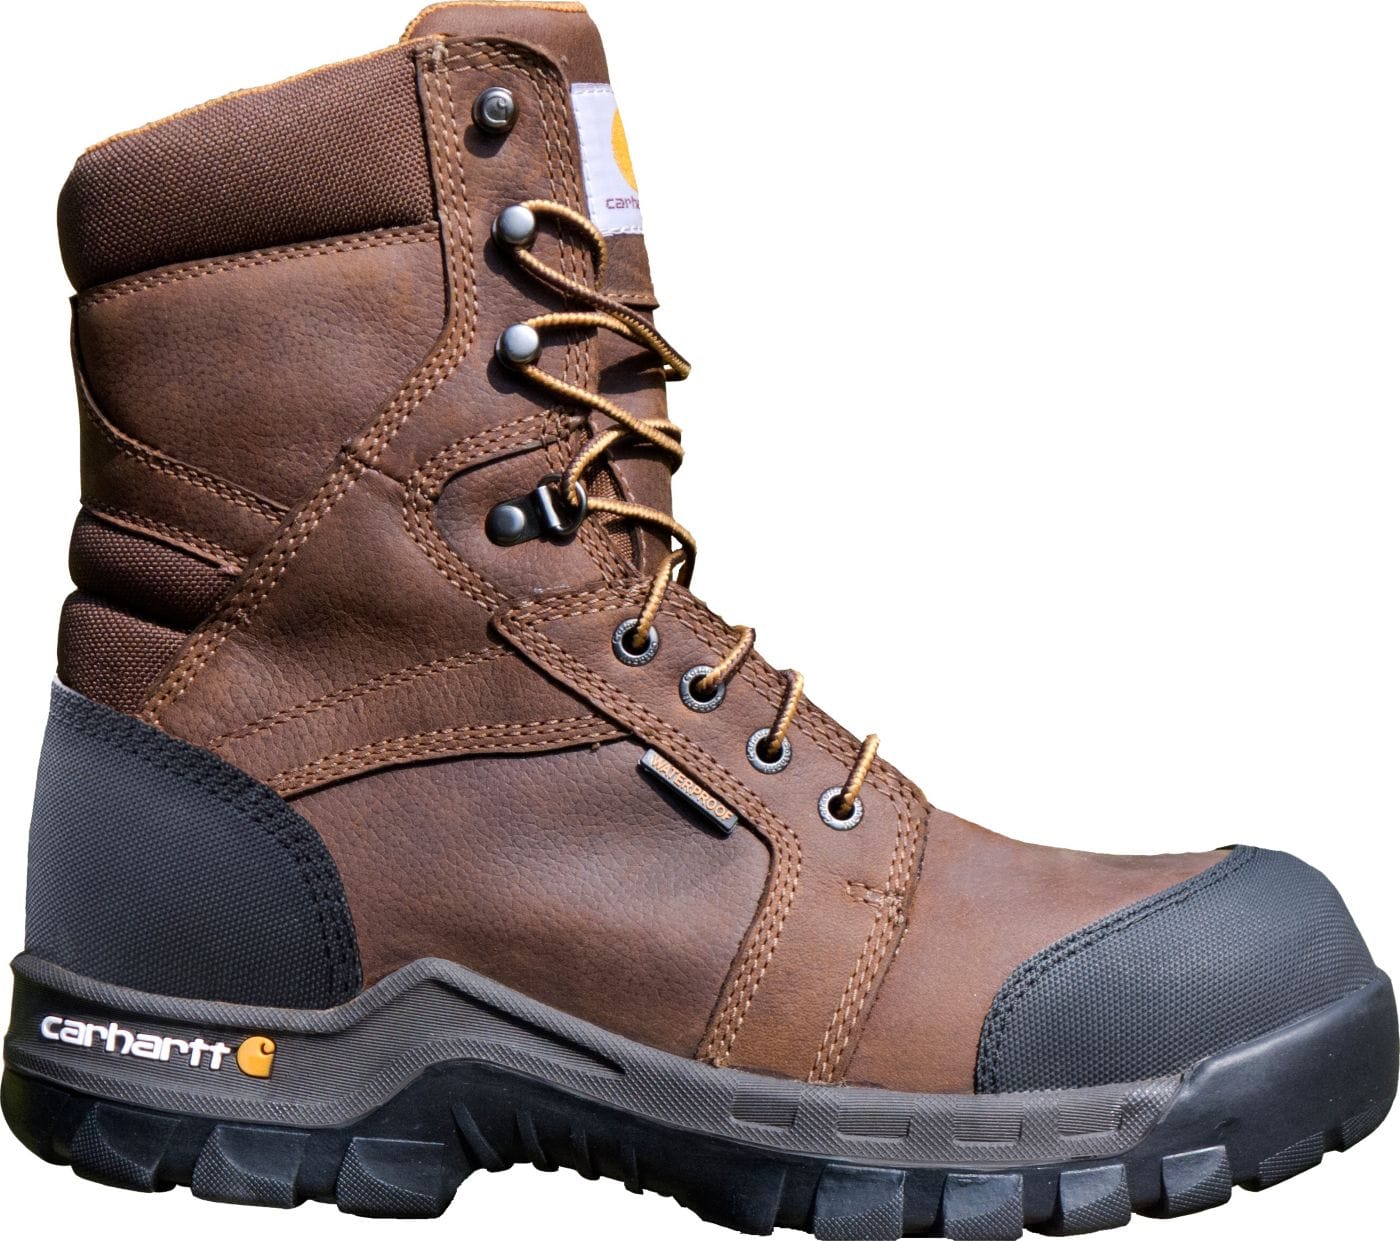 What are the best men's waterproof construction boots?